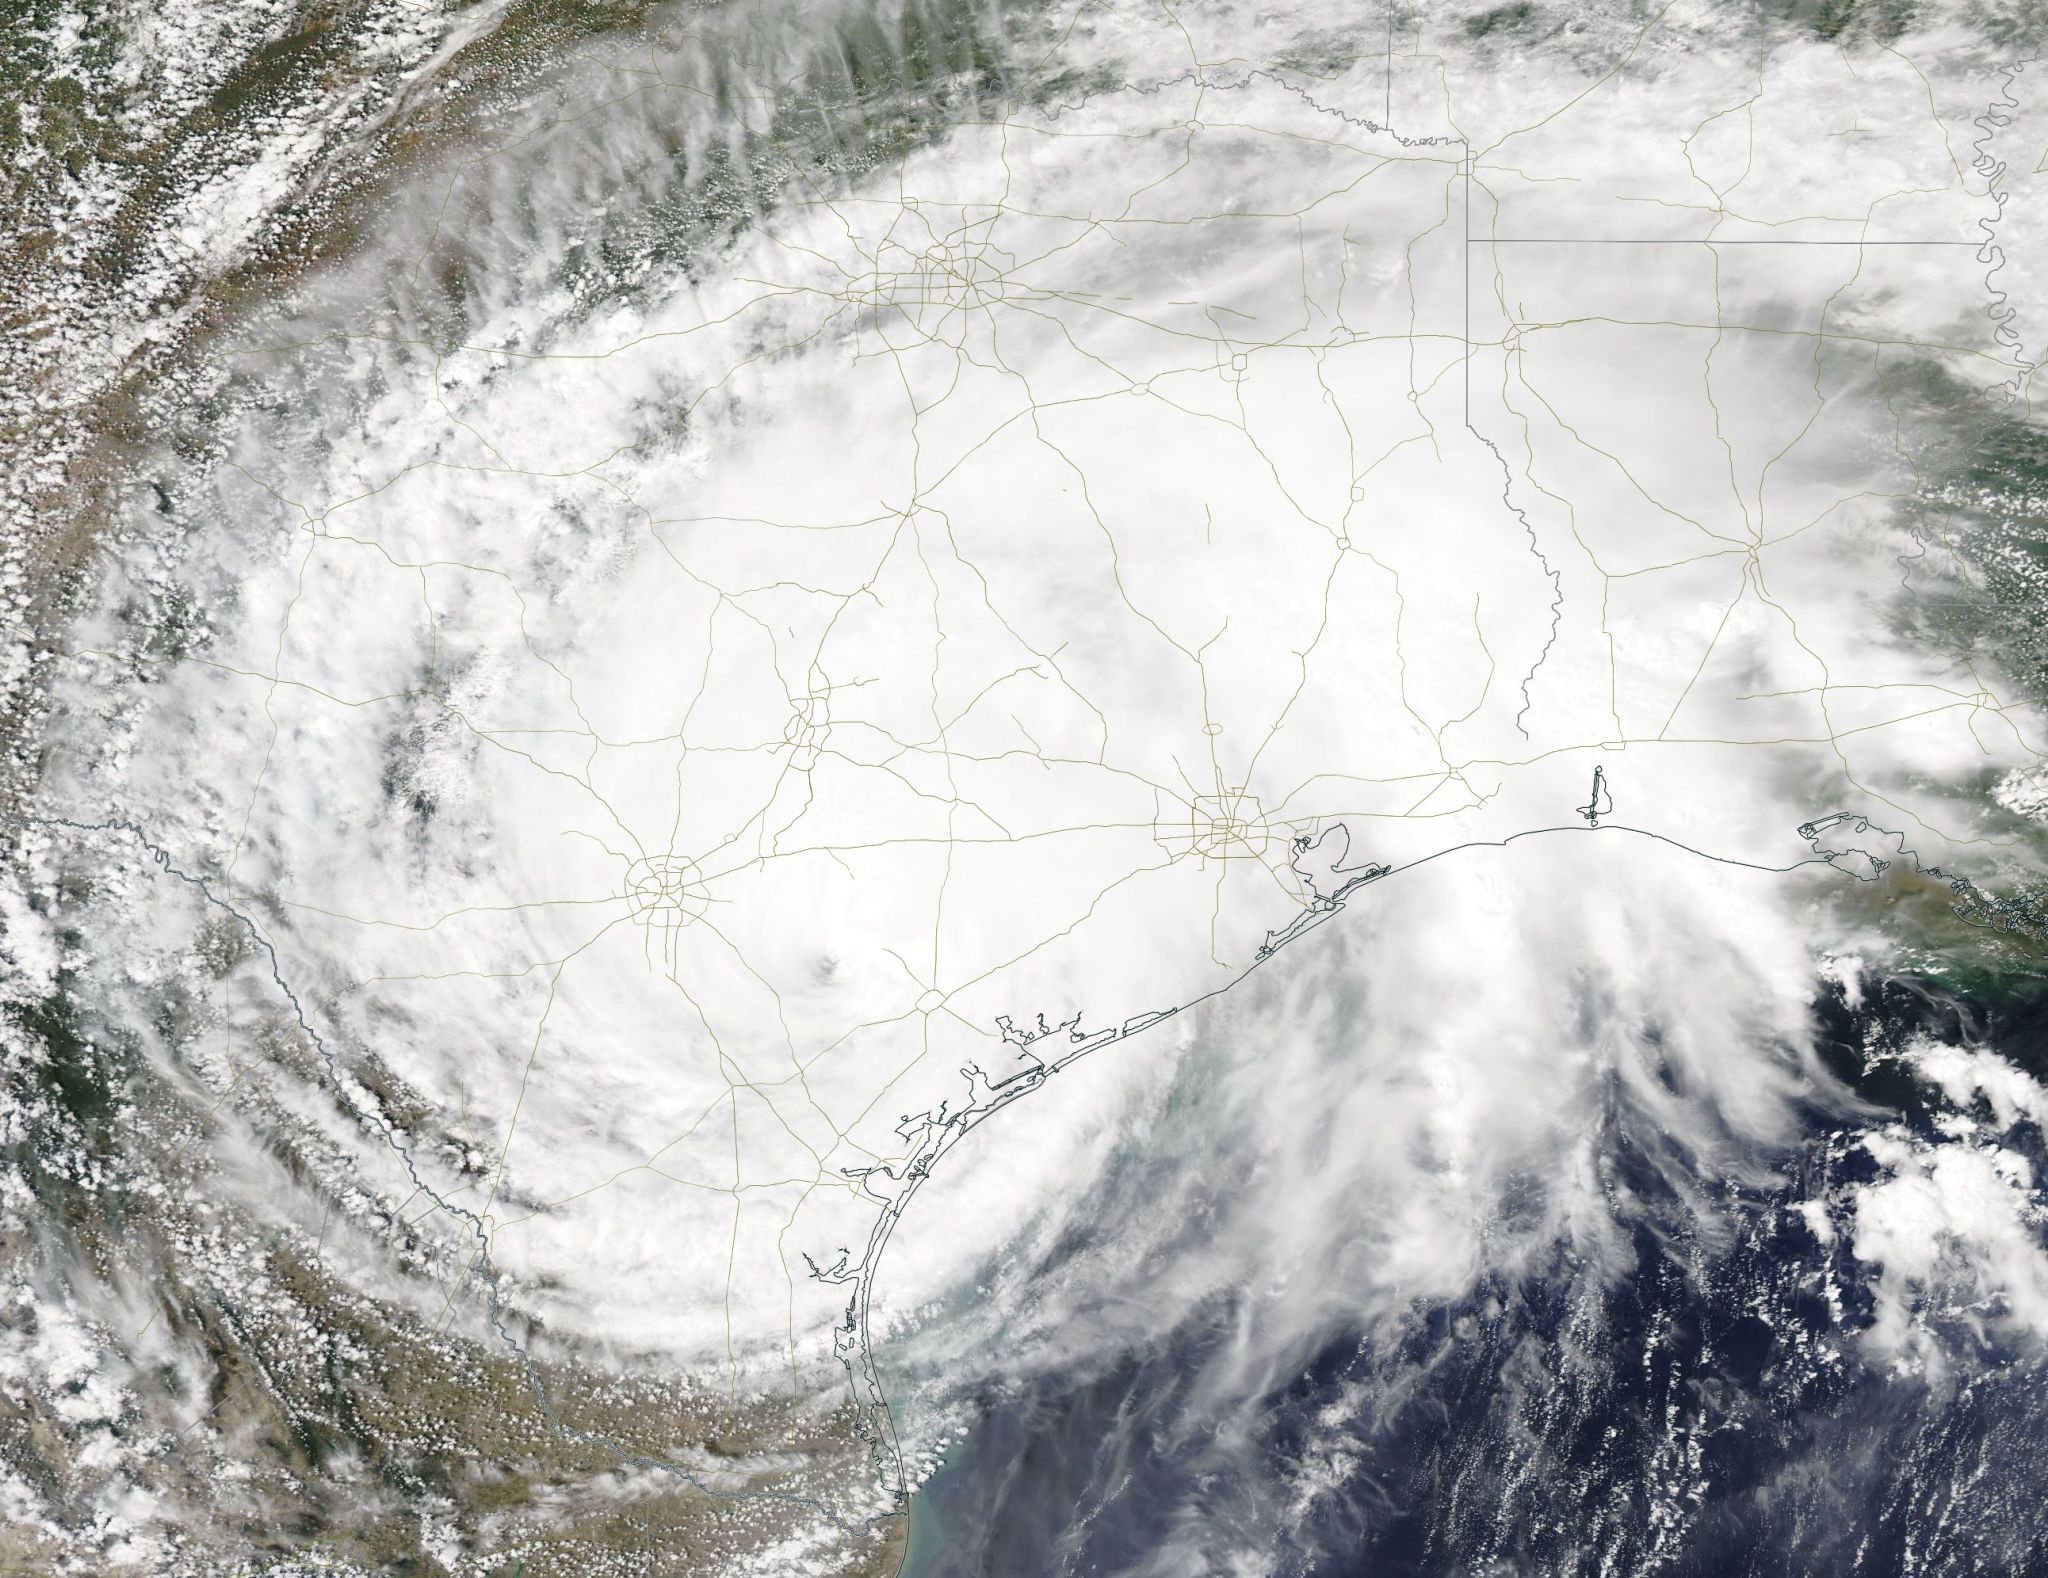 Satellite image of Harvey, a large circular cloud mass over most of Texas.